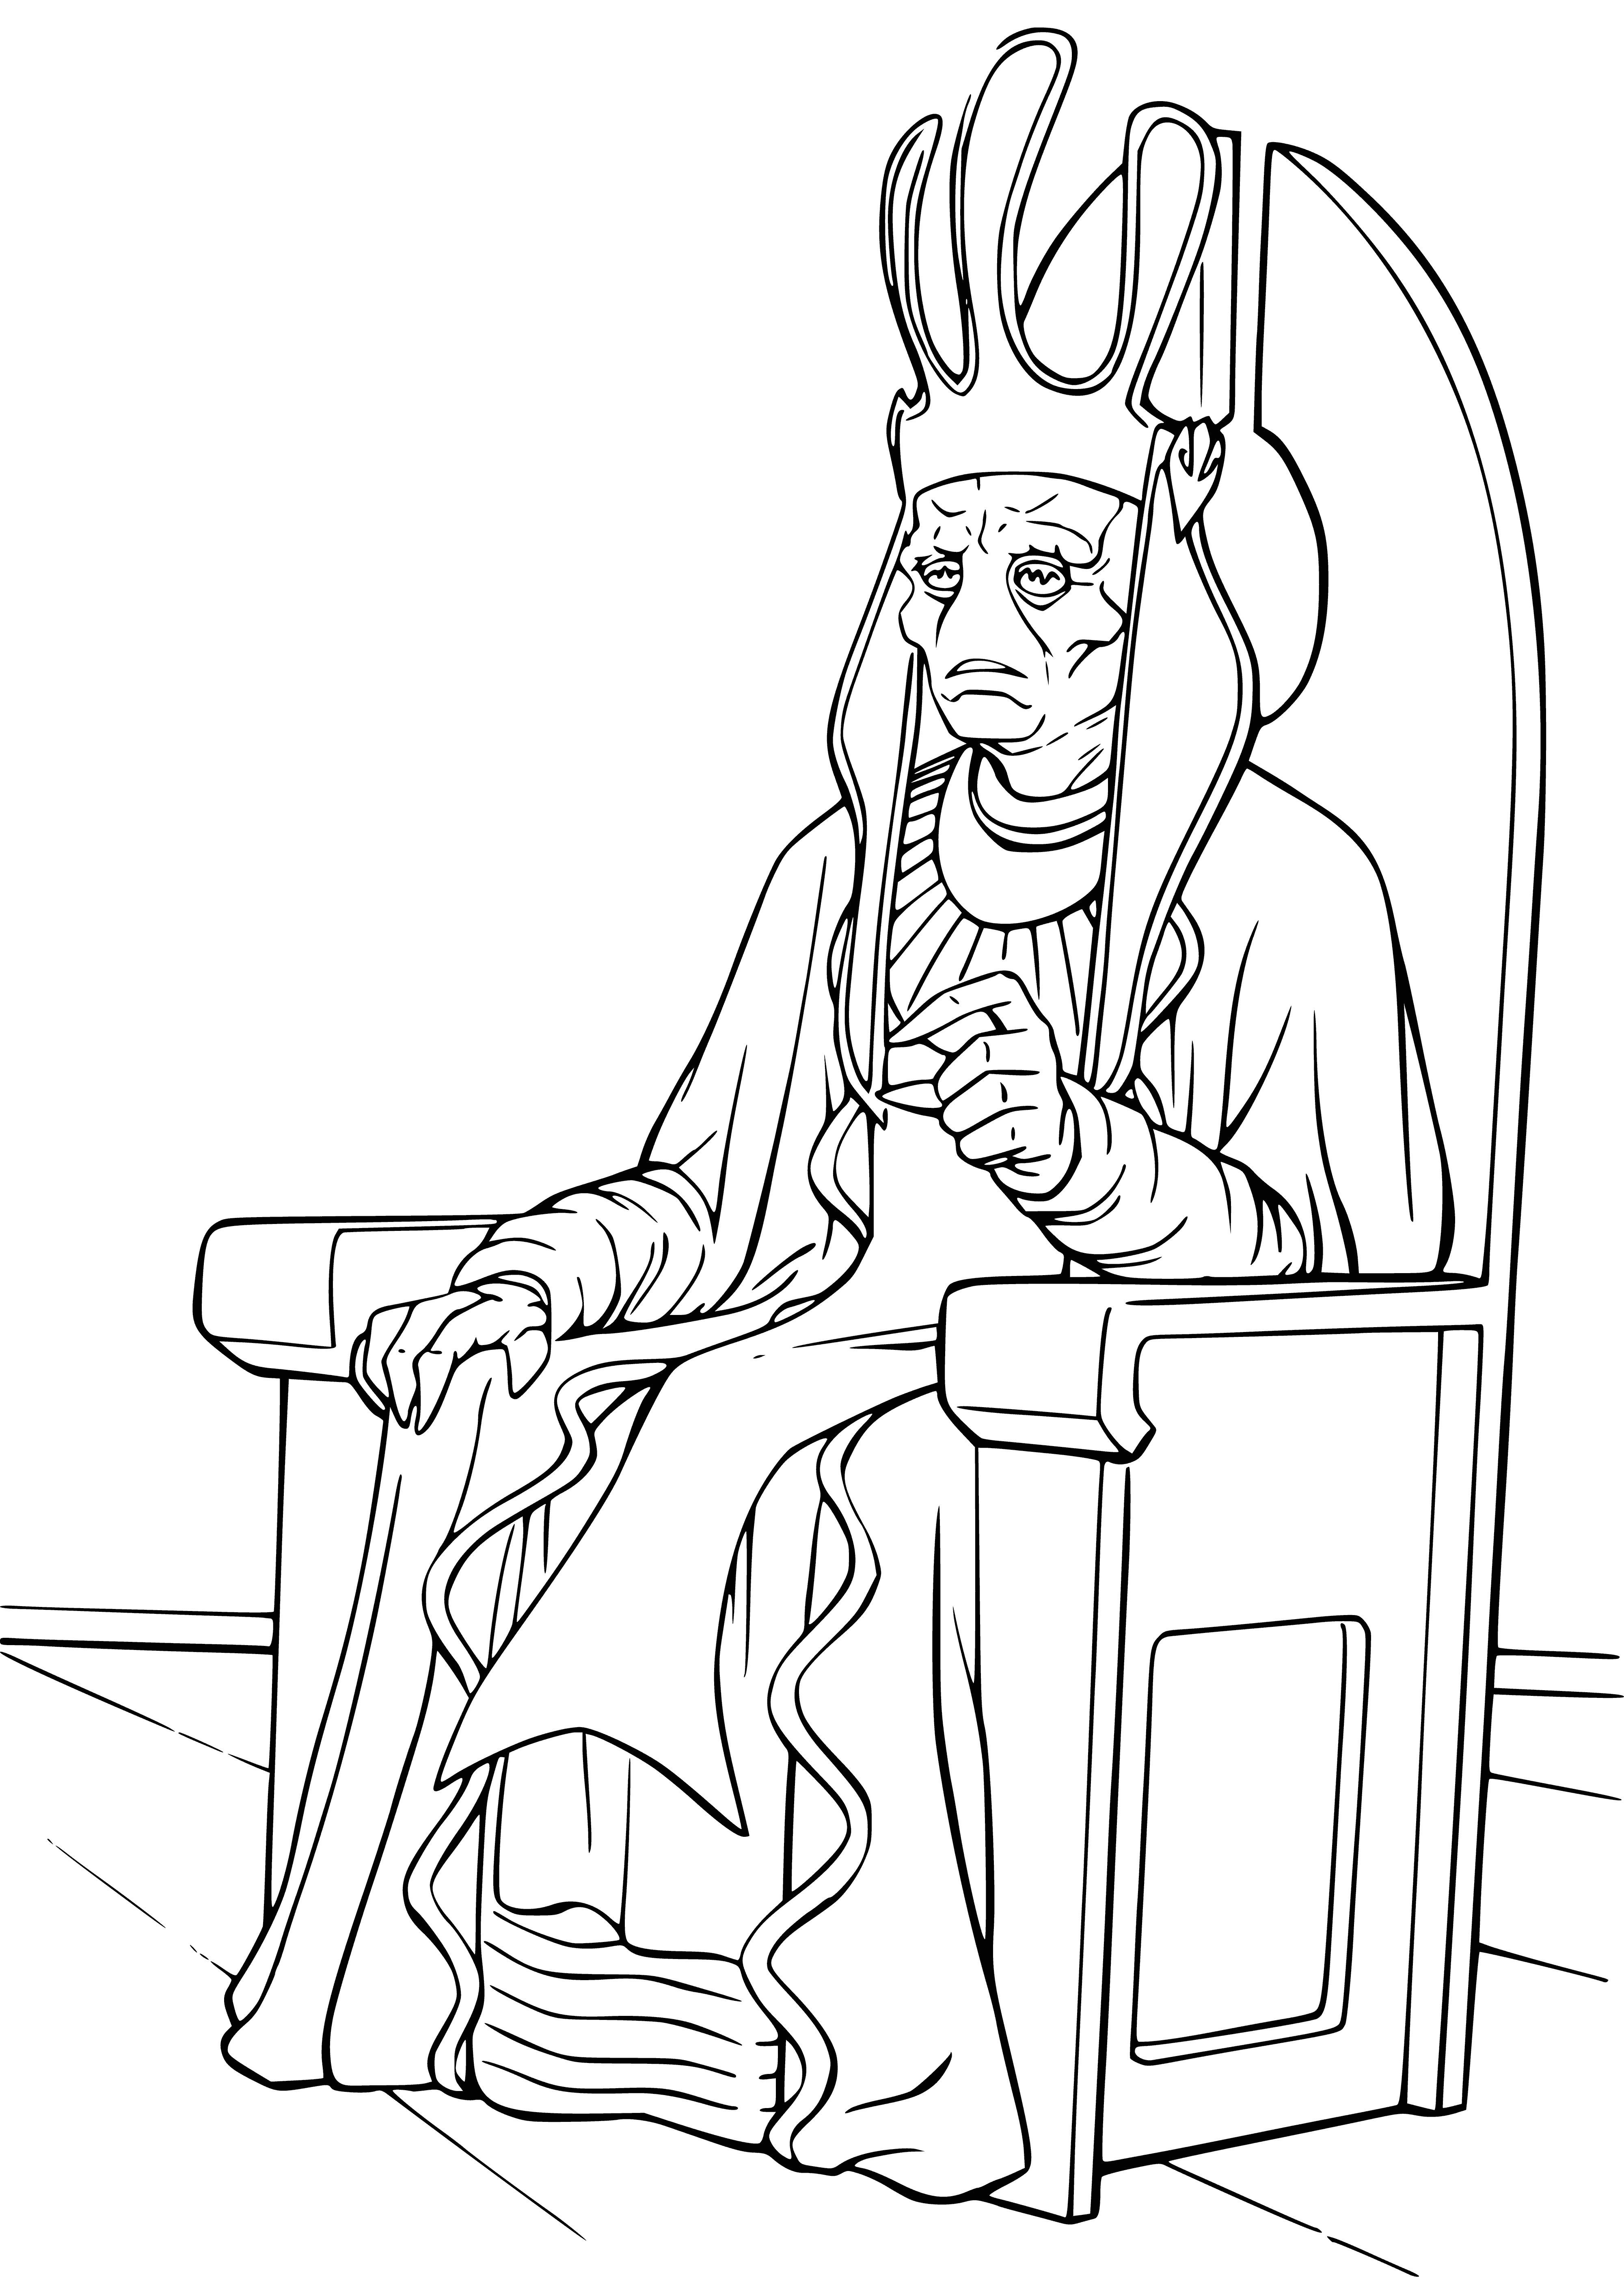 Trade Federation Leader, Governor Nute Gunray coloring page